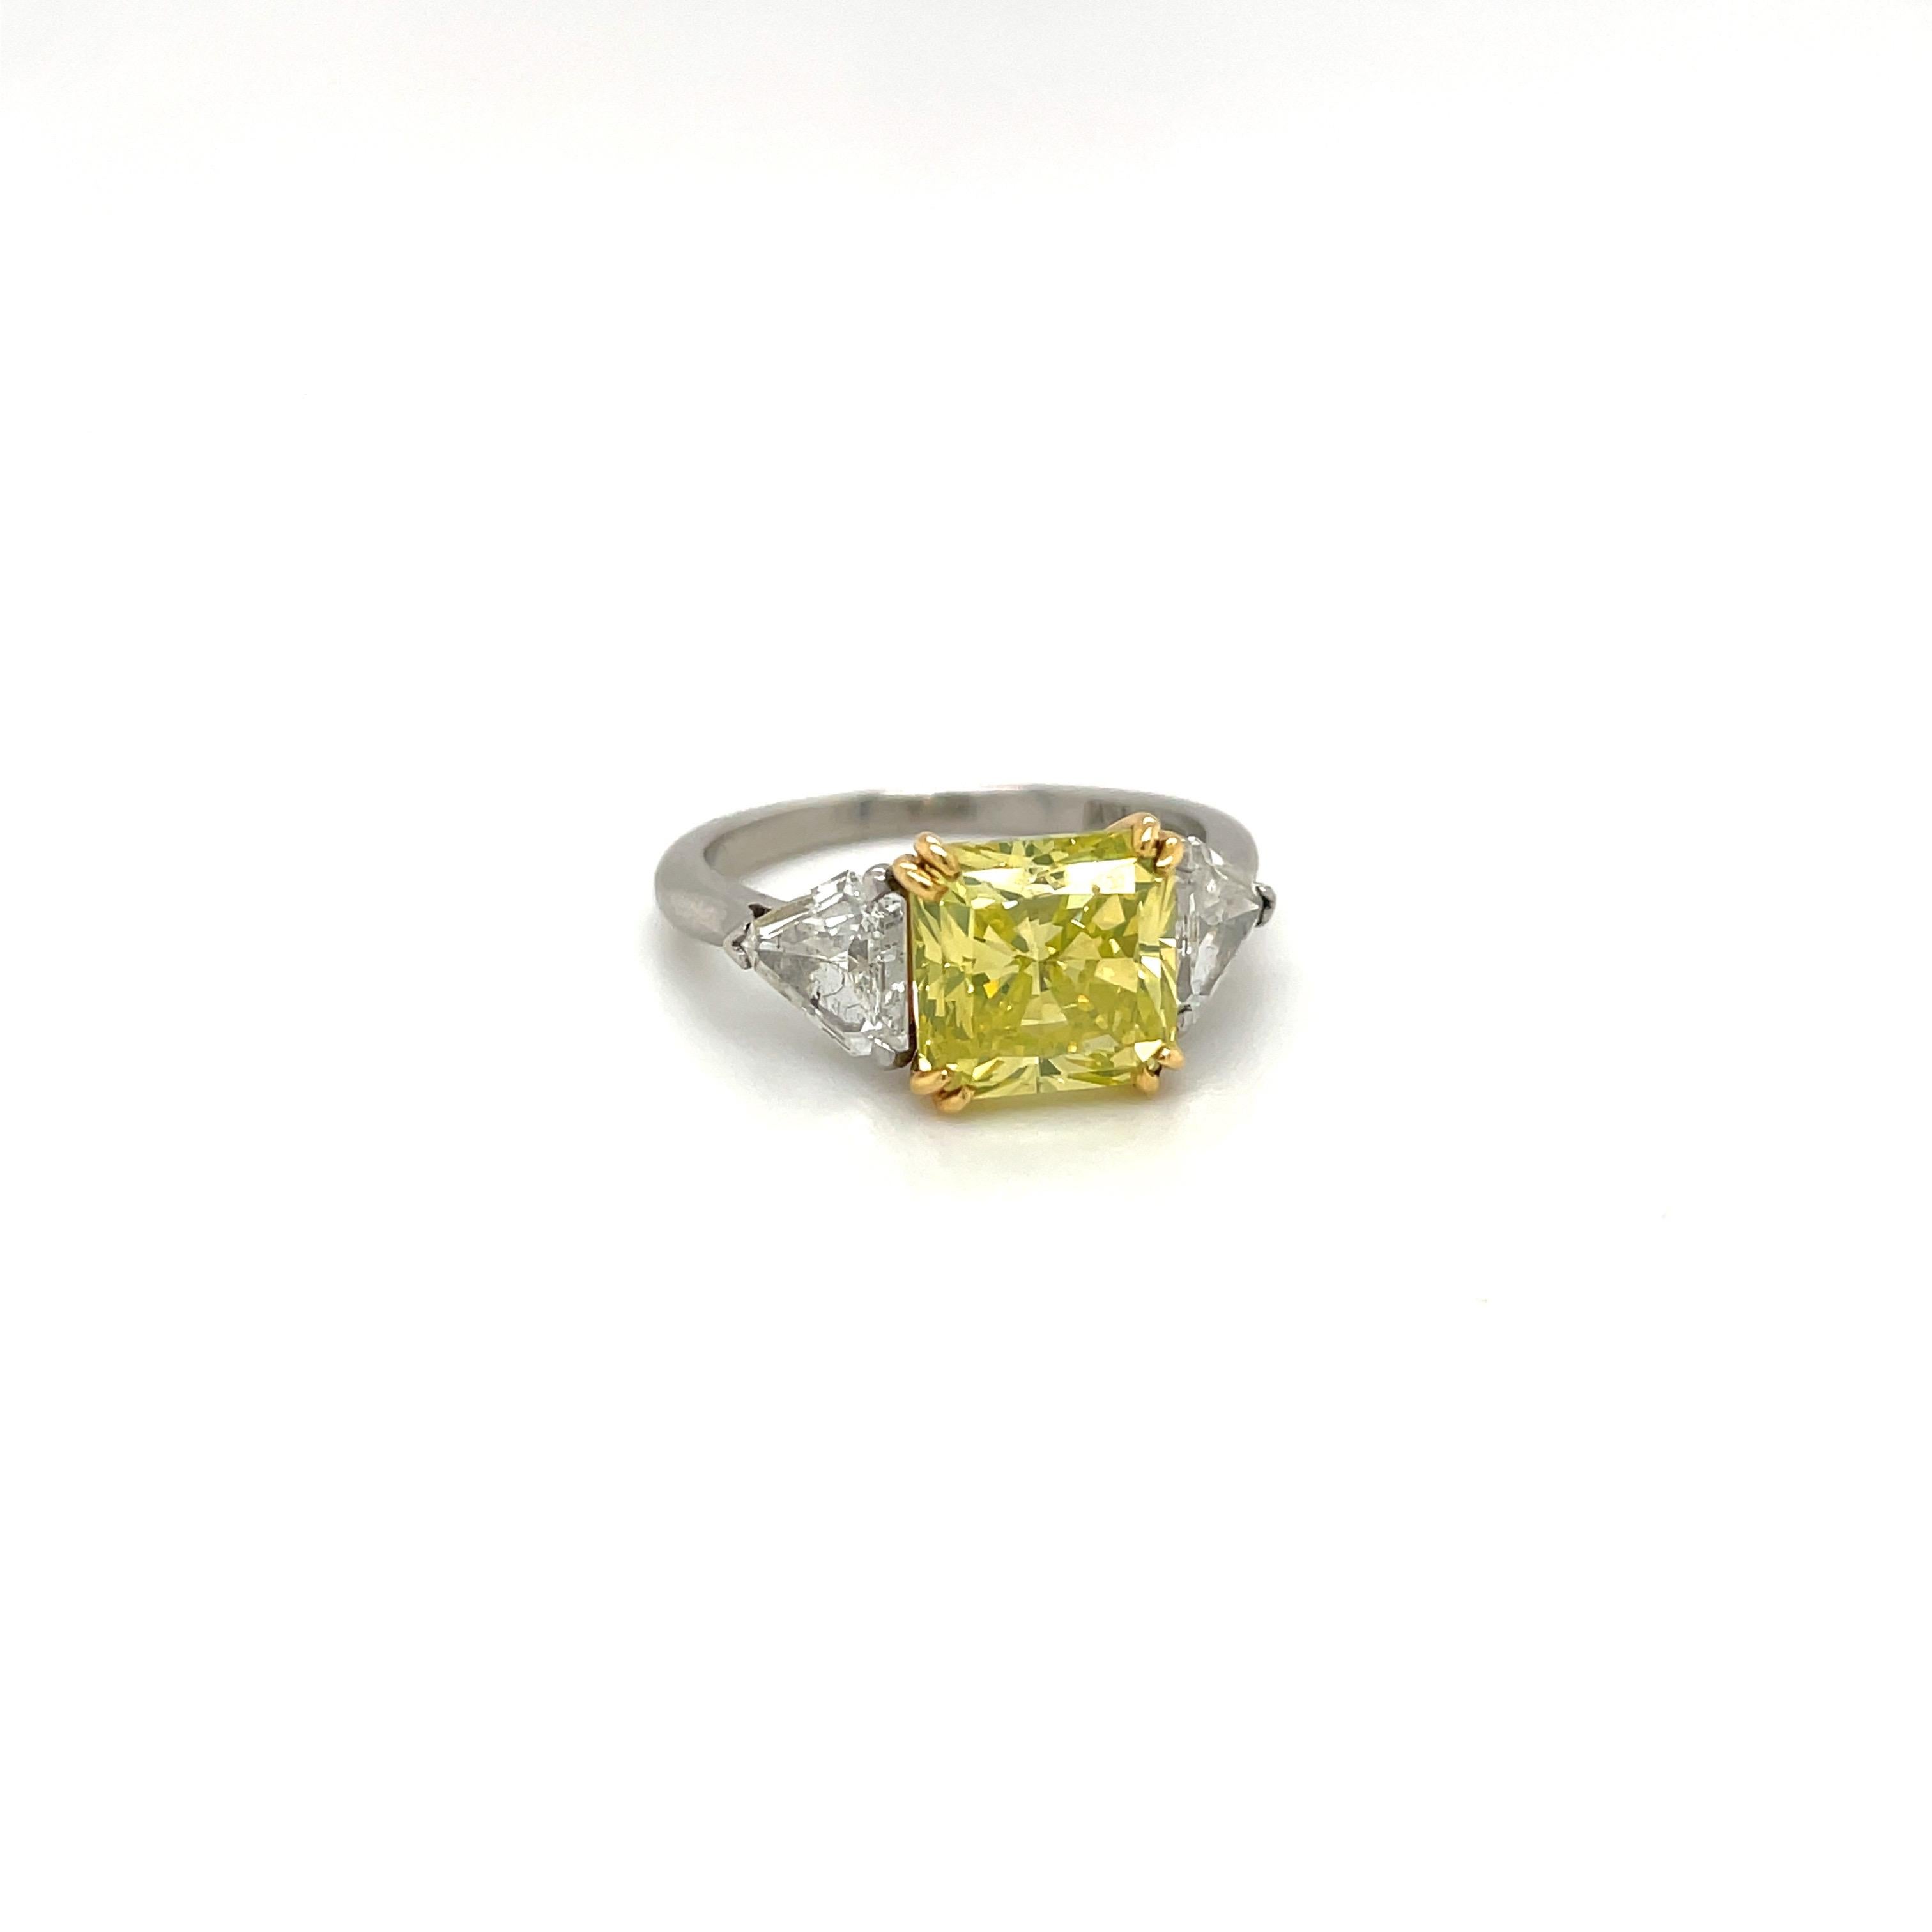 Radiant Cut GIA Natural Fancy Intense 3.06Ct. Chartreuse Radiant Diamond For Sale